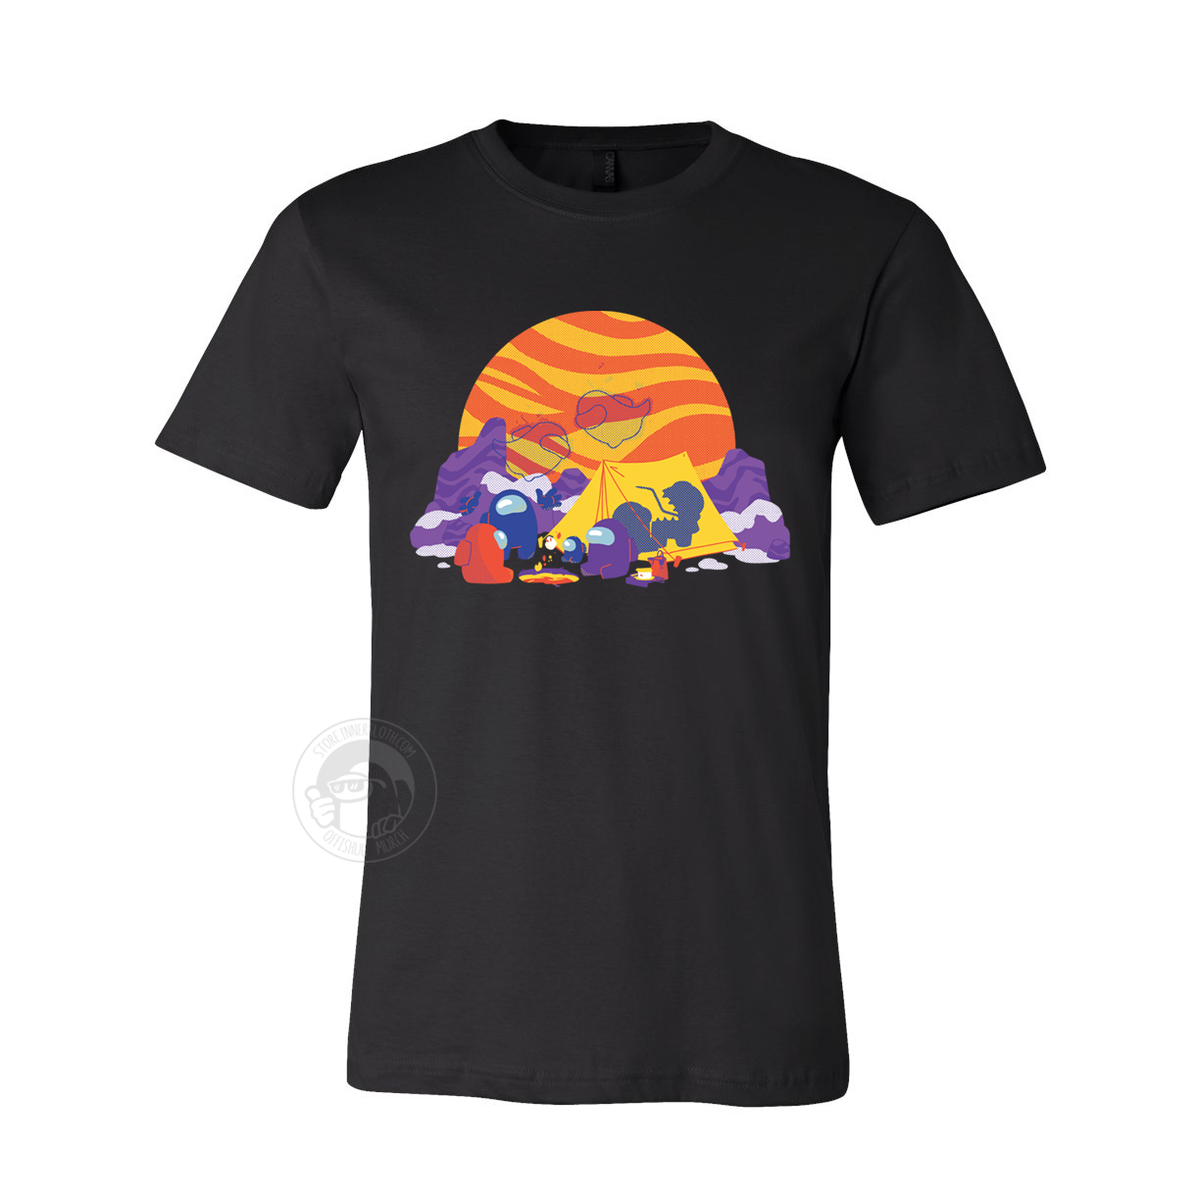 A product photo of the Among Us: Polus Camping Tee. The t-shirt is black. The printed illustration depicts a purple, blue and red crewmates with a camping tent among the snowy mountains of Polus with a large orange and yellow swirly sun in the background.